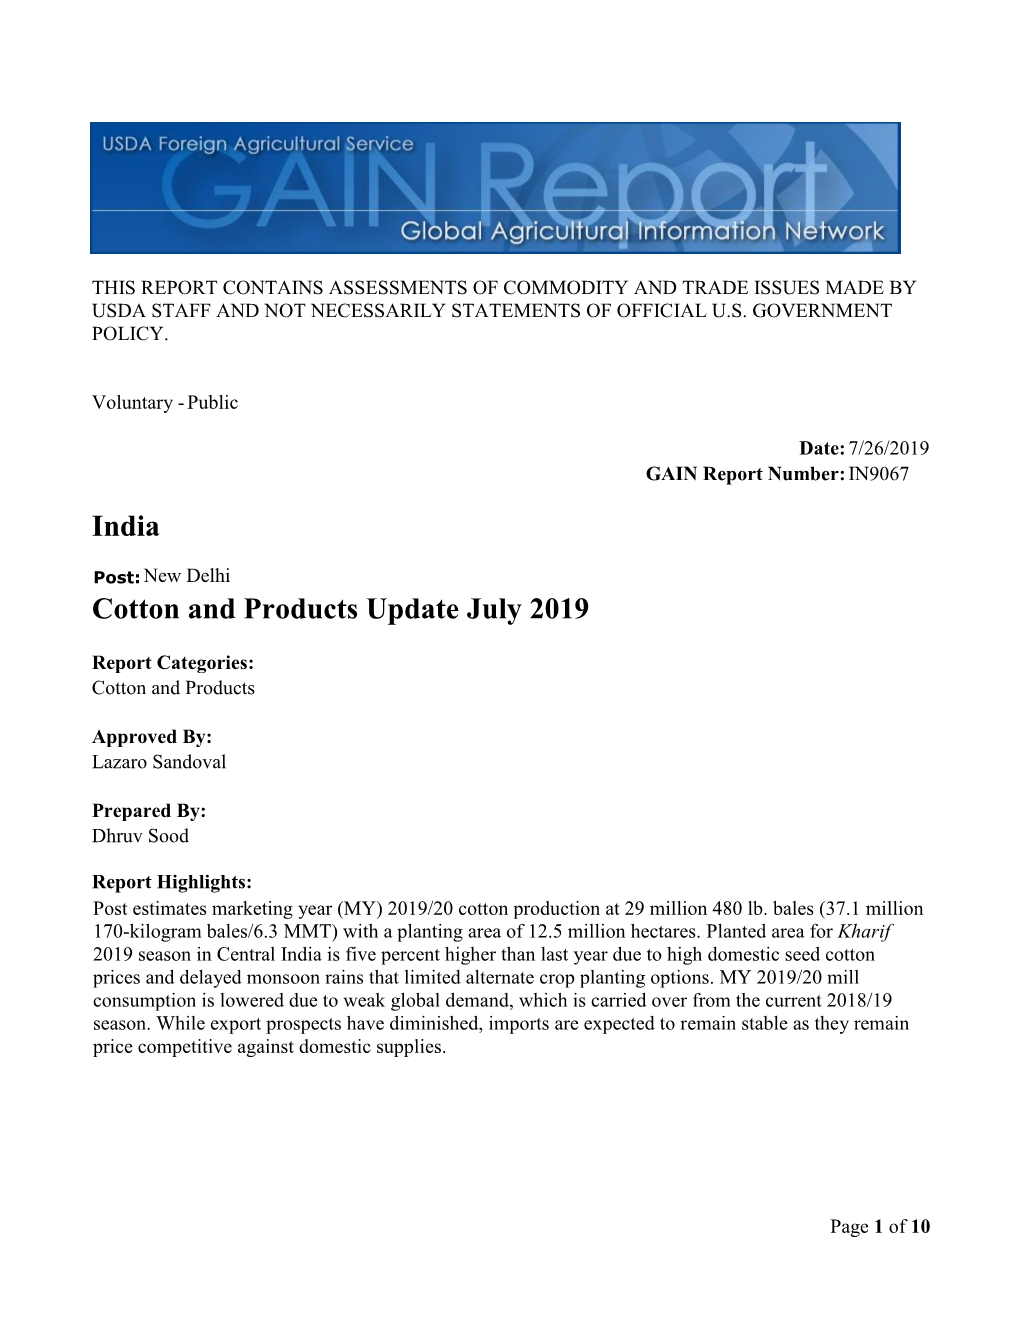 India Cotton and Products Update July 2019